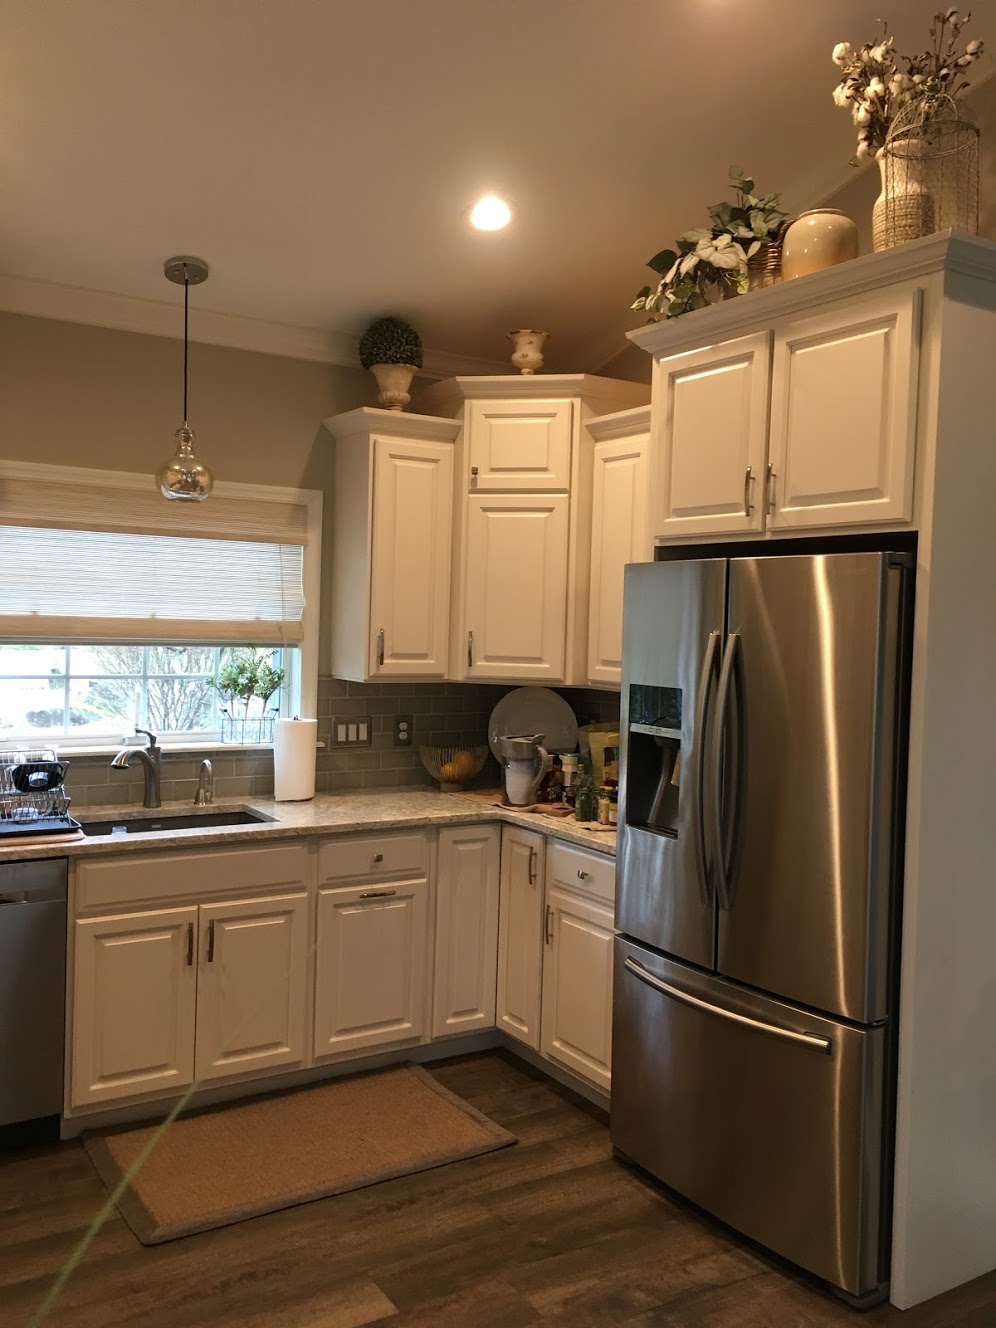 Beautiful White Kitchen Remodel, Decorative Tile Backsplash, Glass Front Door, Decorative Hood and Stainless Steel Appliances